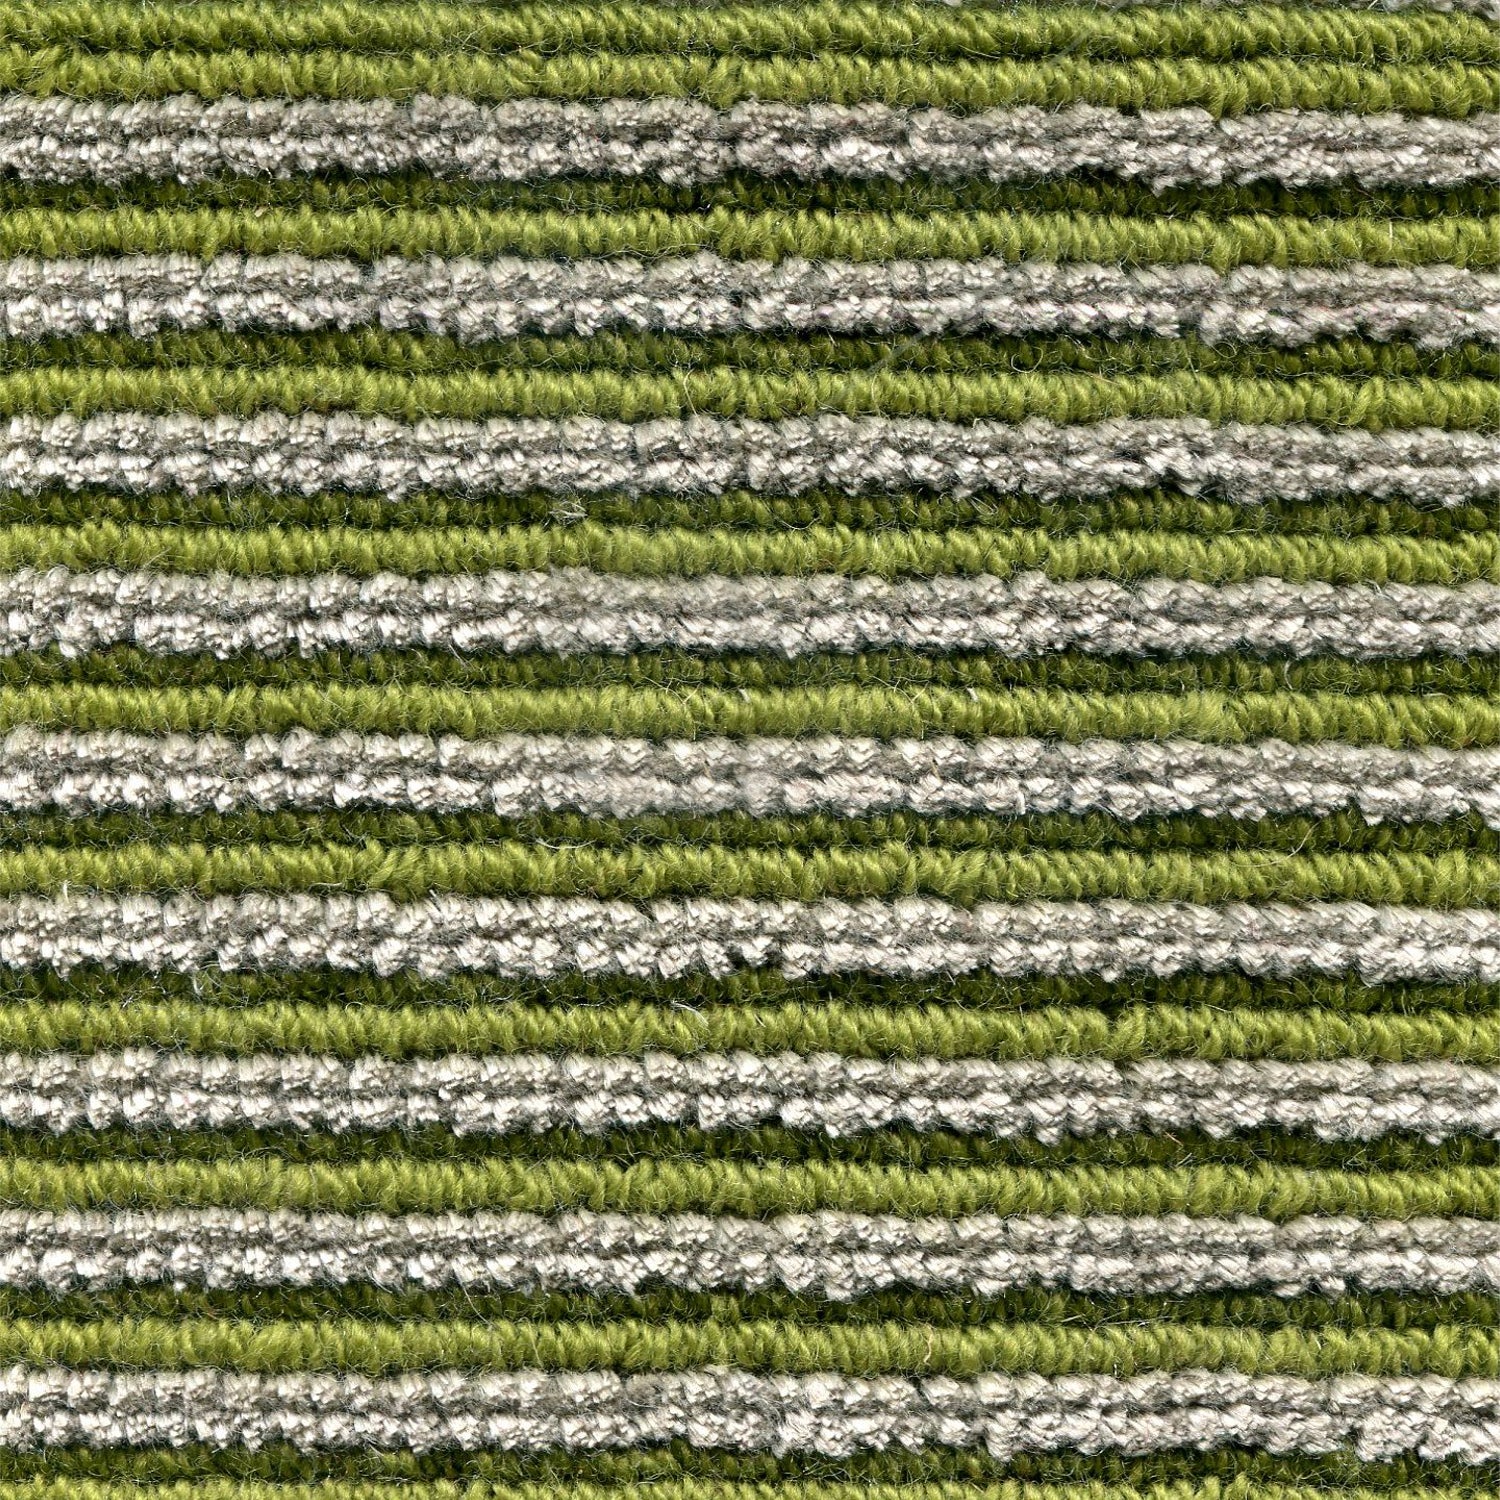 Wool-linen broadloom carpet swatch in a chunky striped weave in shades of green and gray.